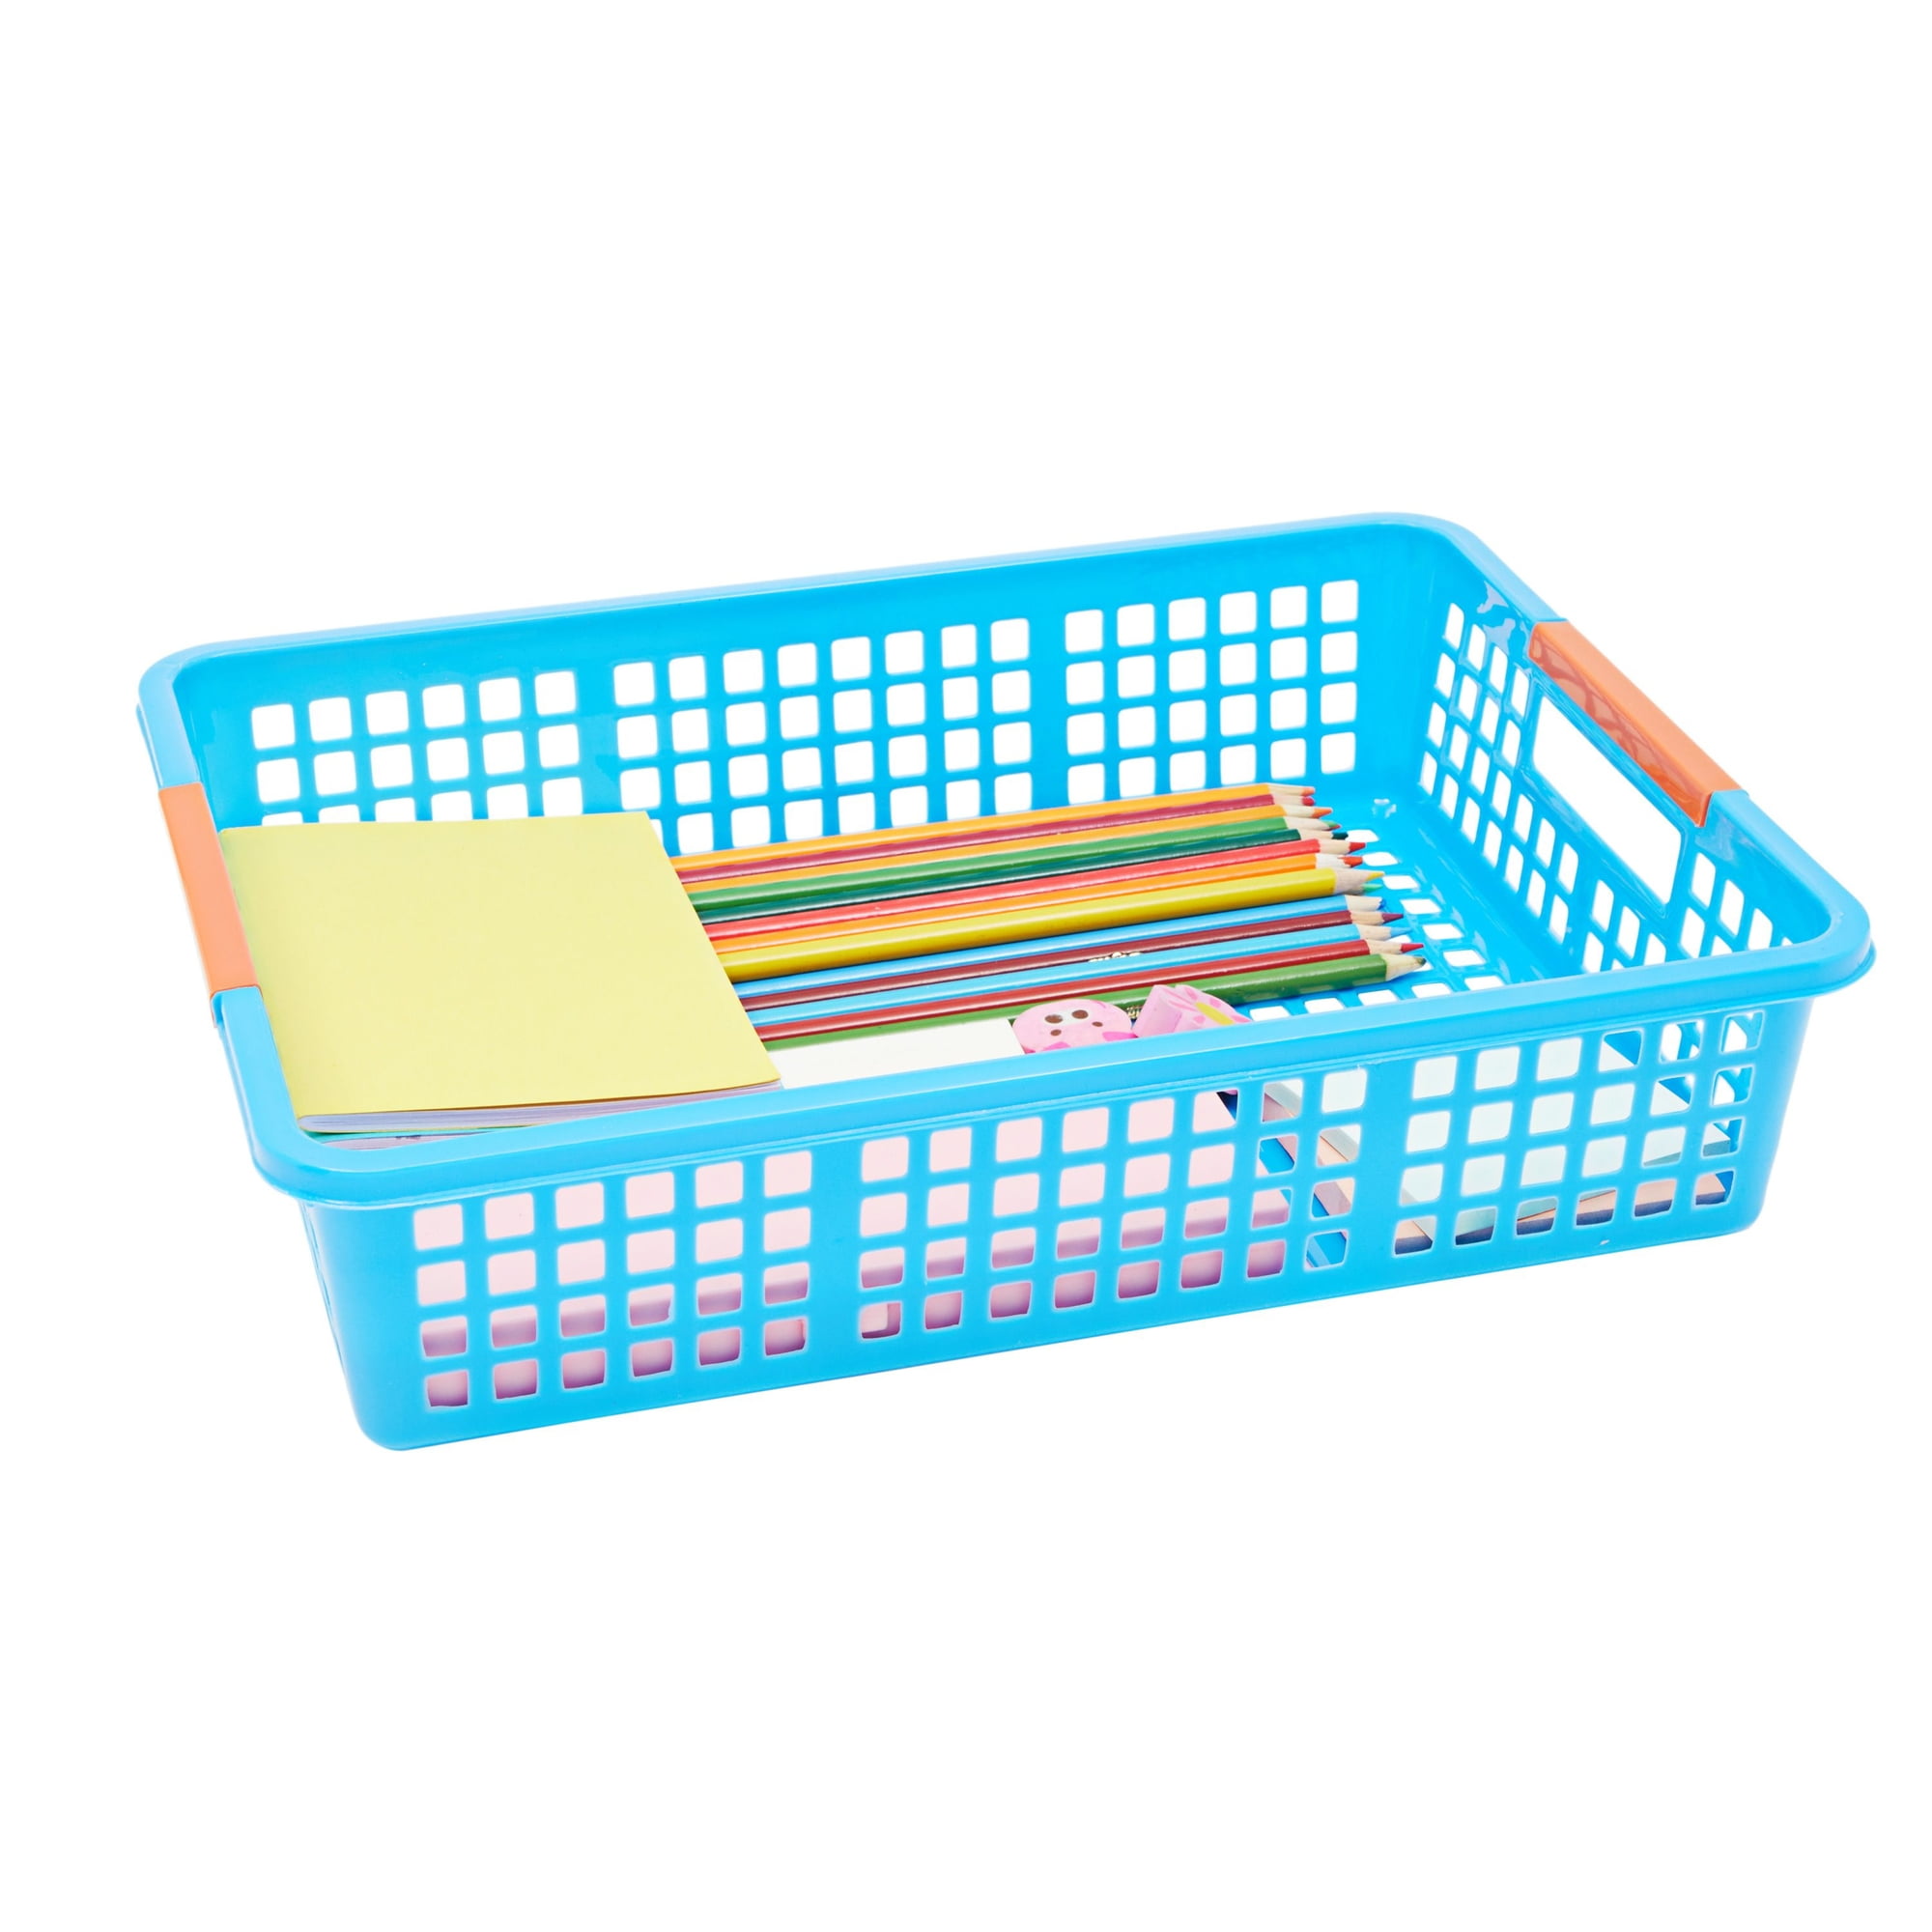 Rinboat Multi-Colored Plastic Storage Baskets, Office Drawer Organizer  Baskets, 6 Packs, F